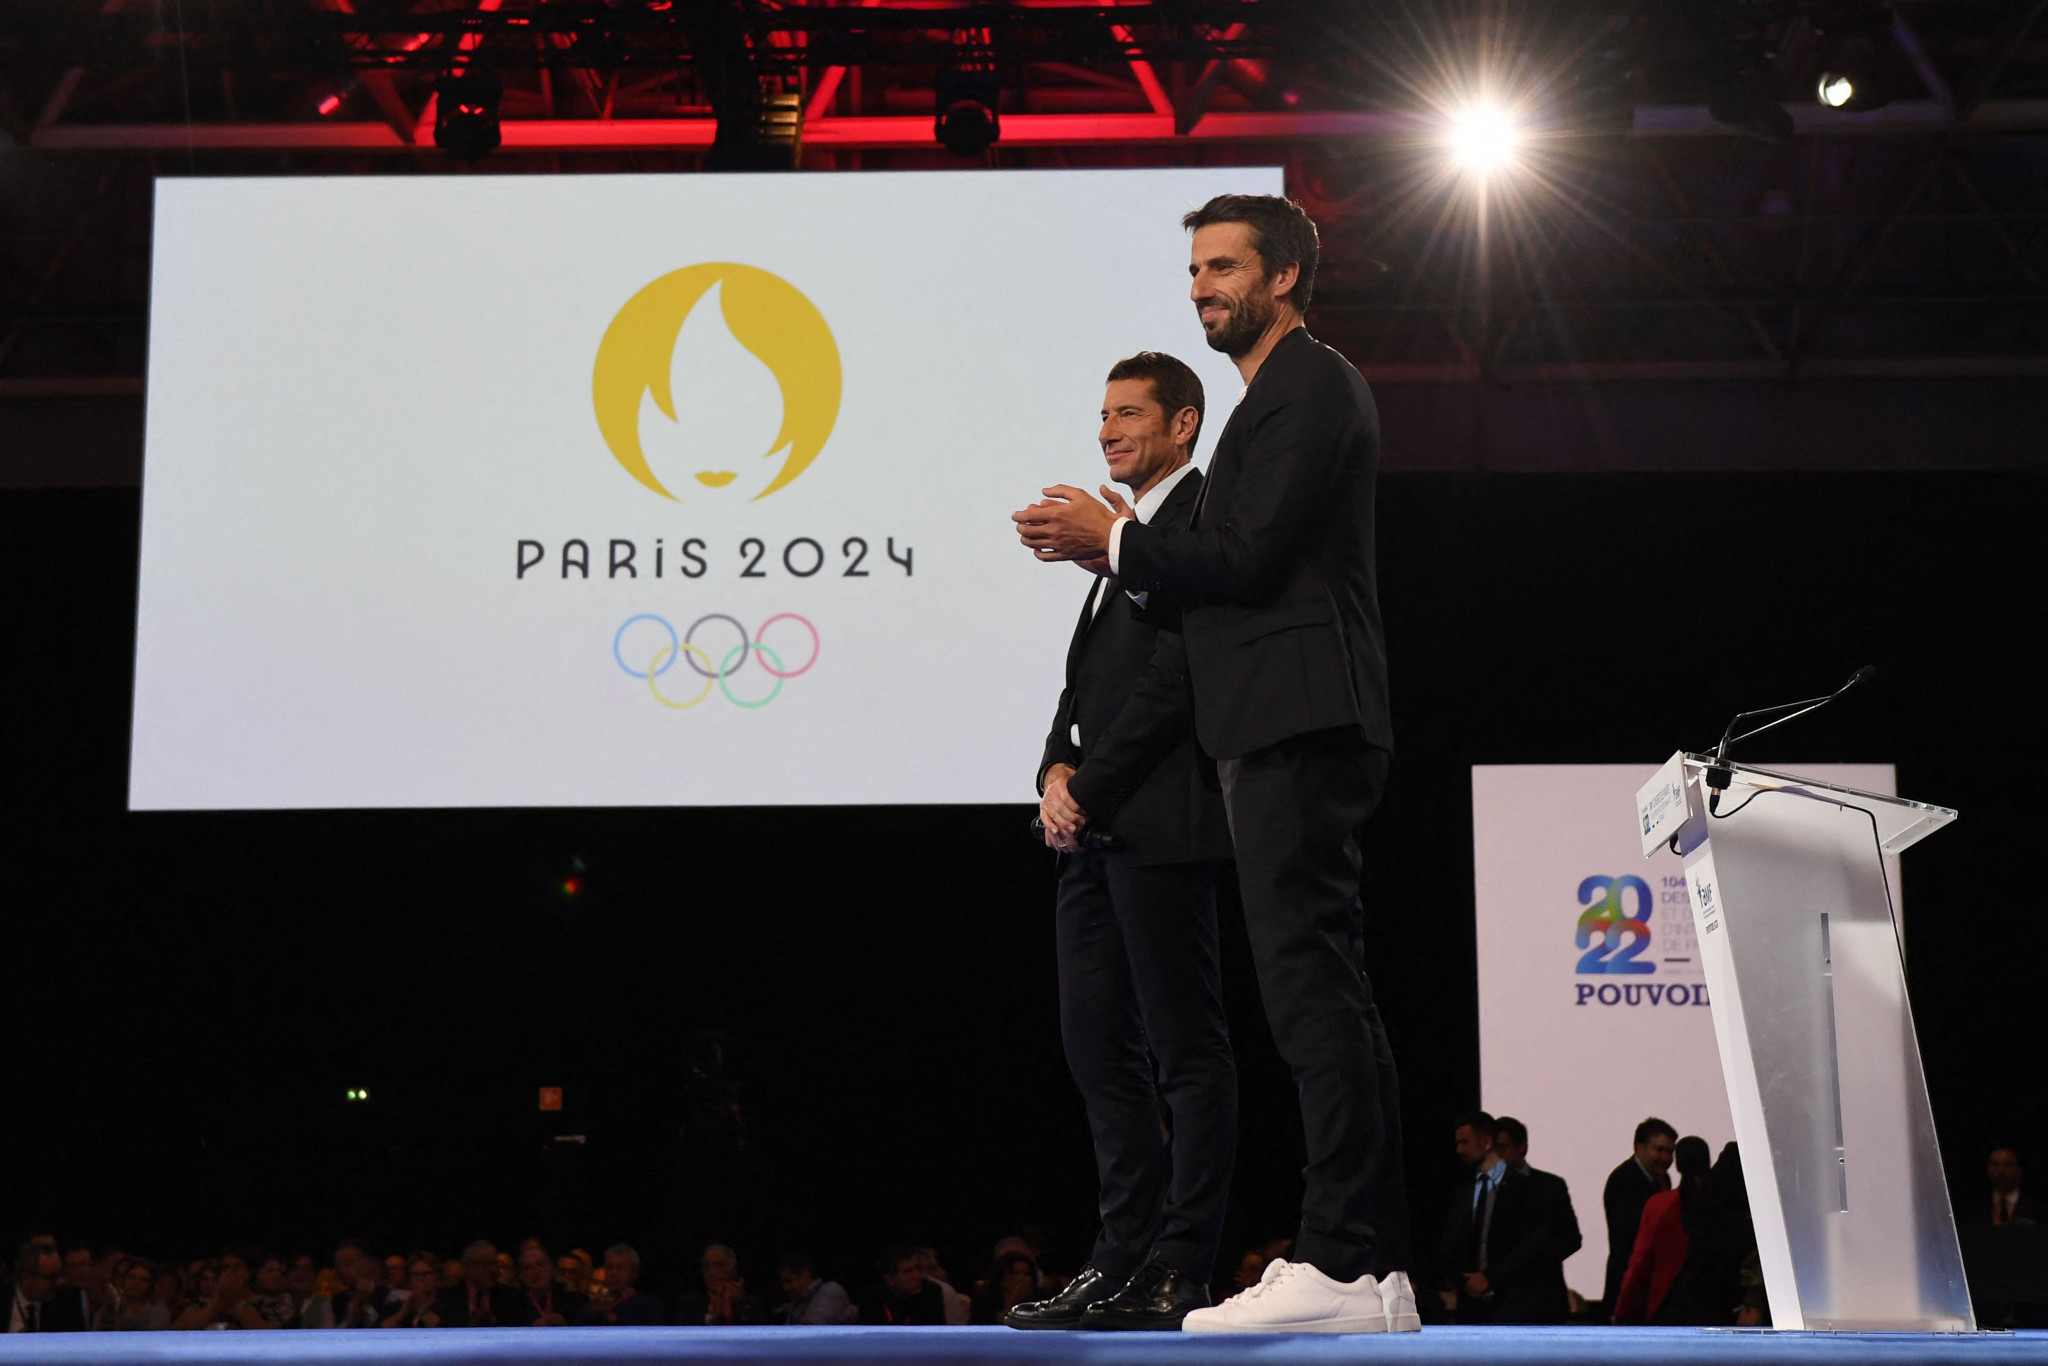 Pound said he was confident with how Paris 2024's preparations for the next Olympics were going ©Getty Images